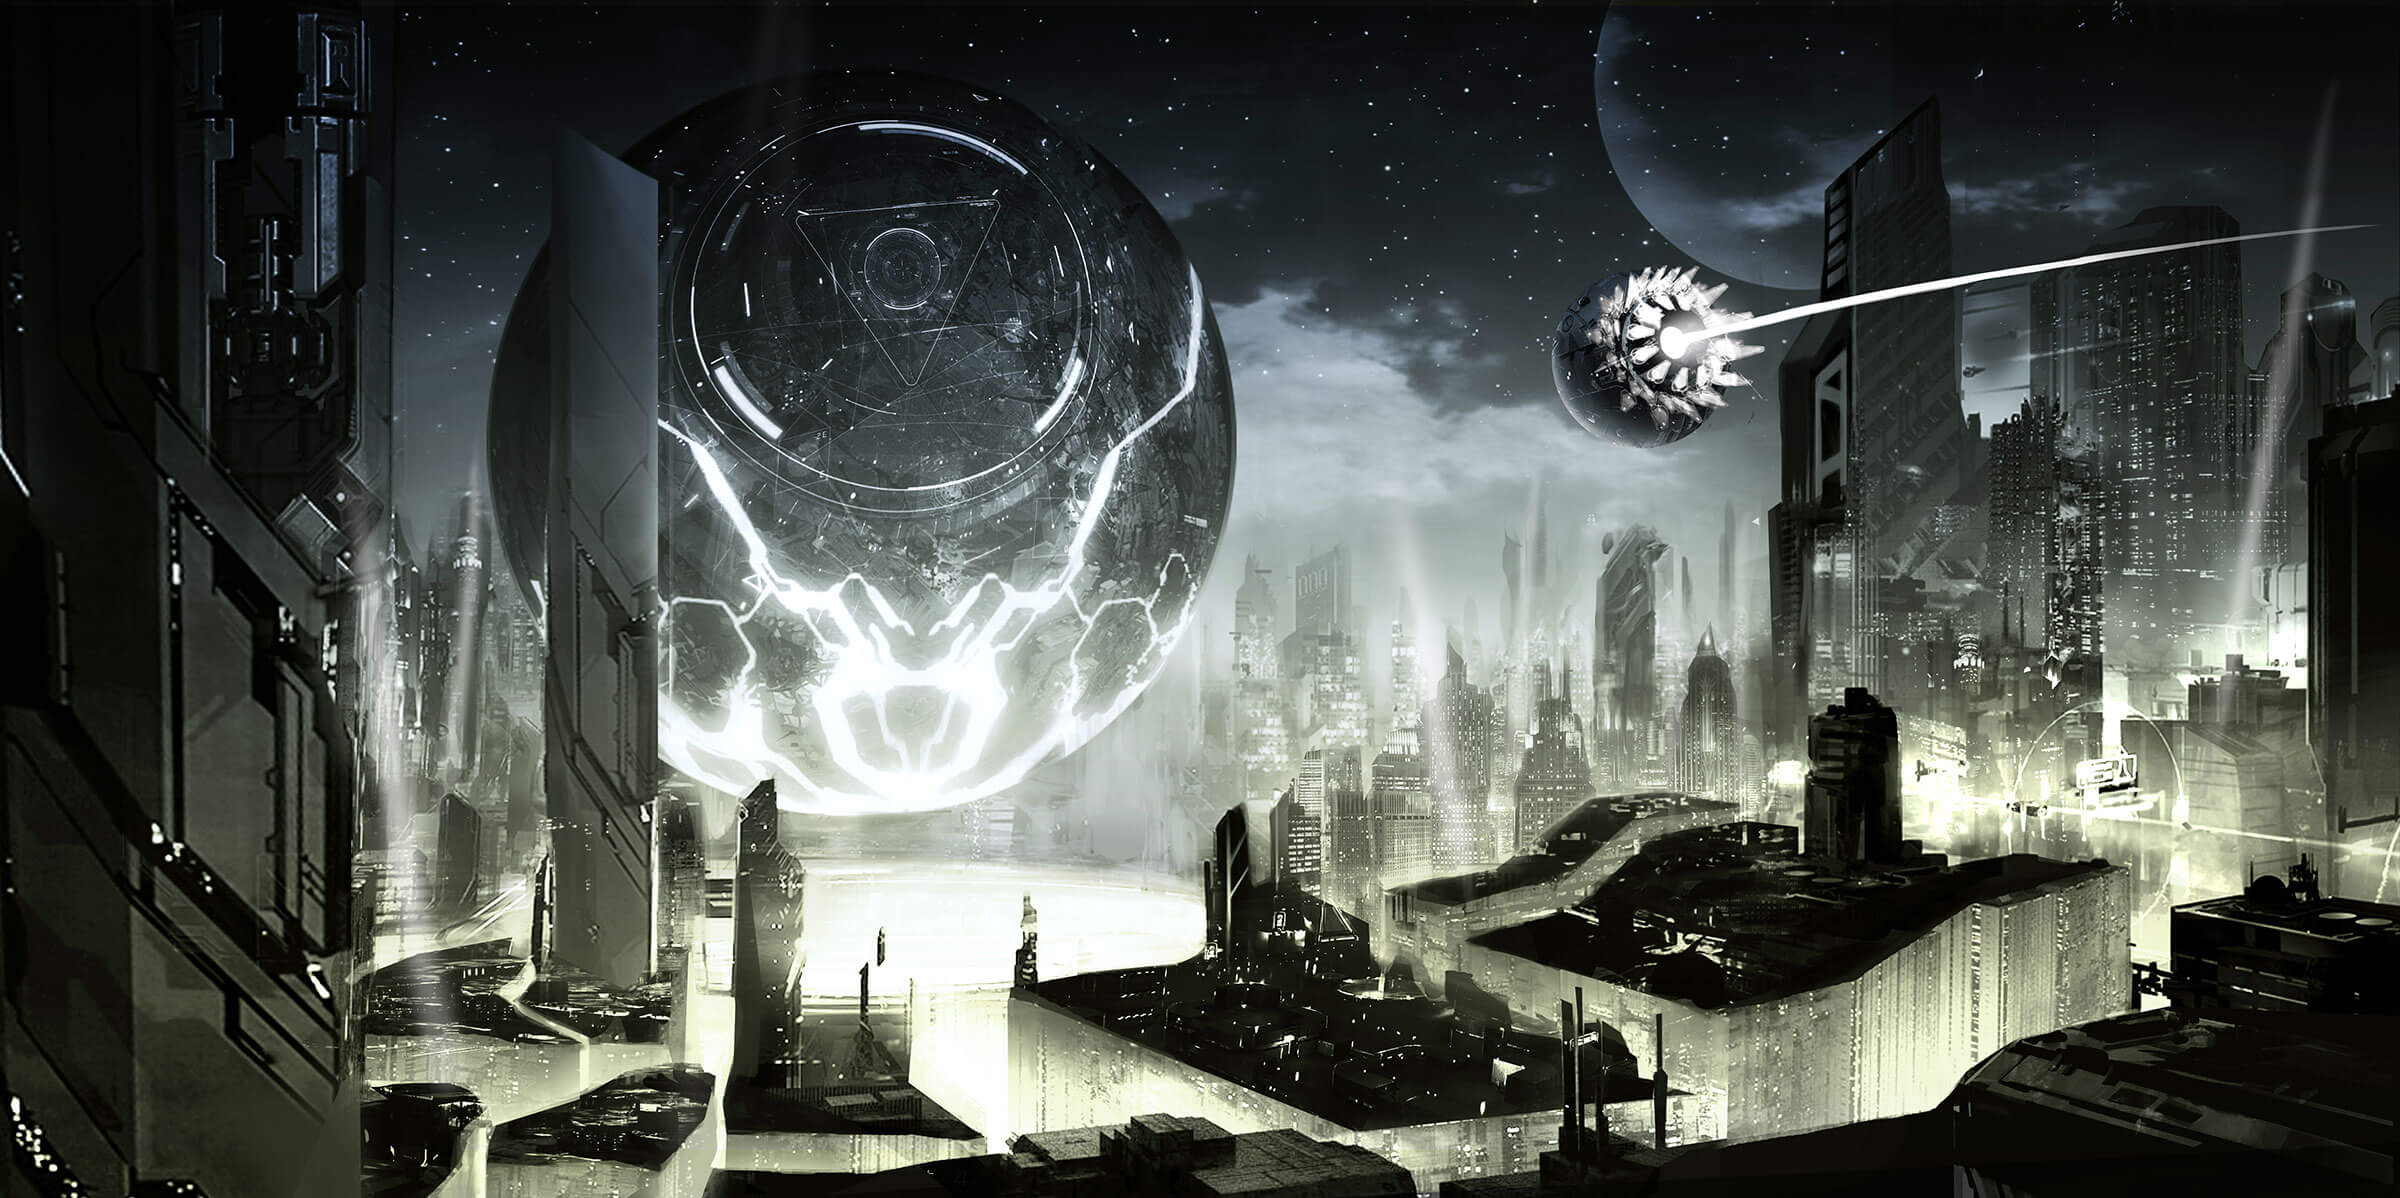 A futuristic cityscape built around a giant sphere hovering just above the ground.